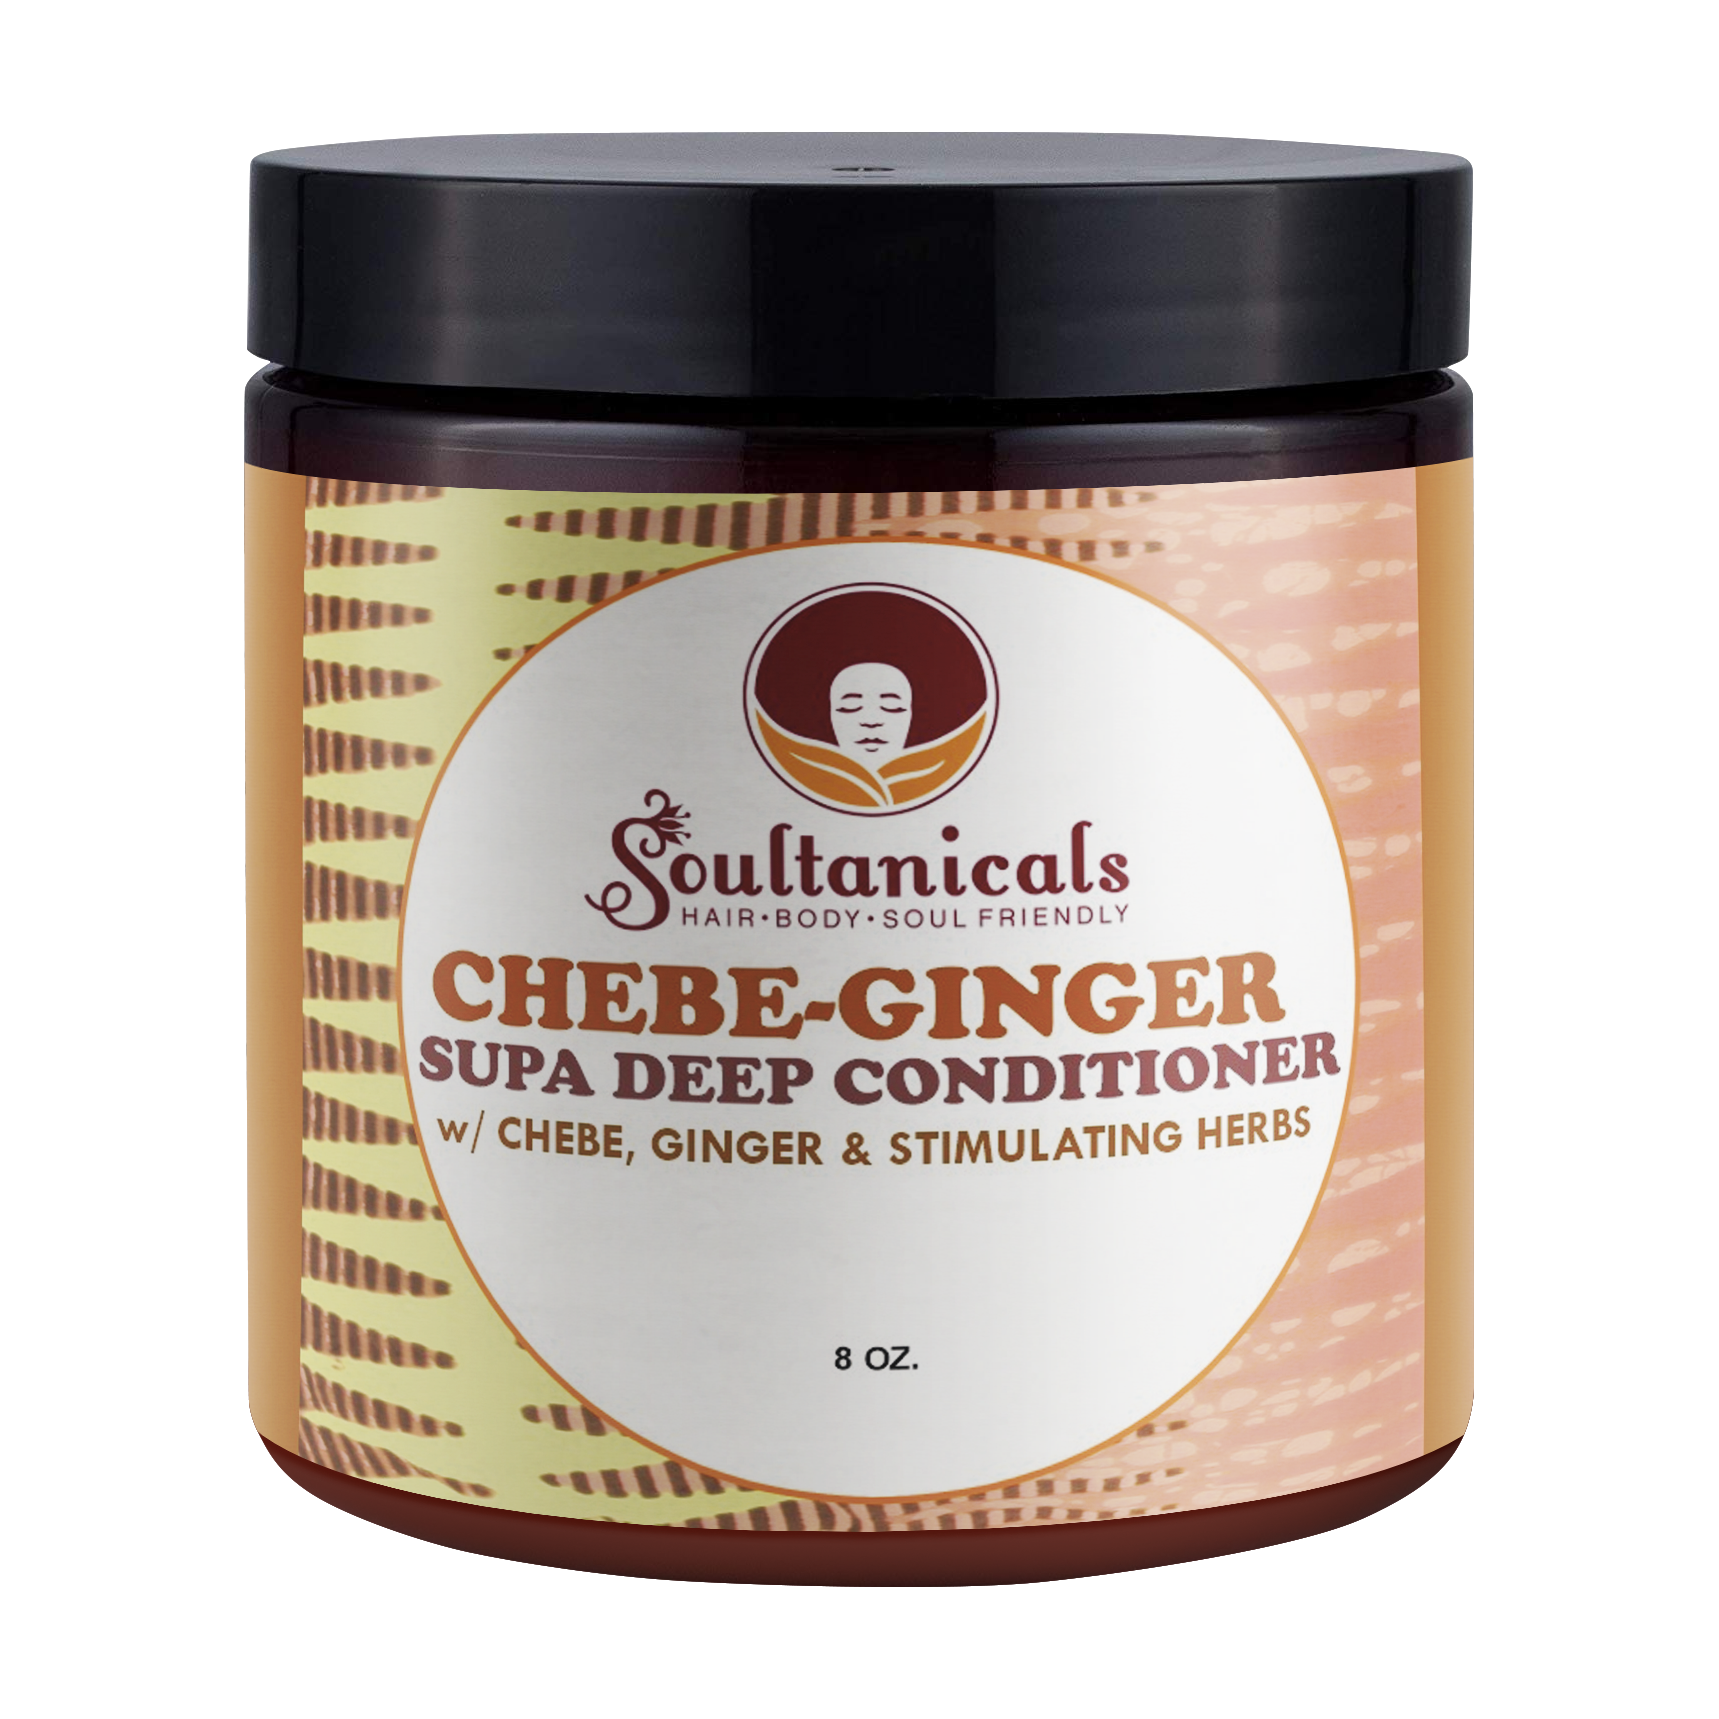 Chebe-Ginger, Supa Deep Conditioner